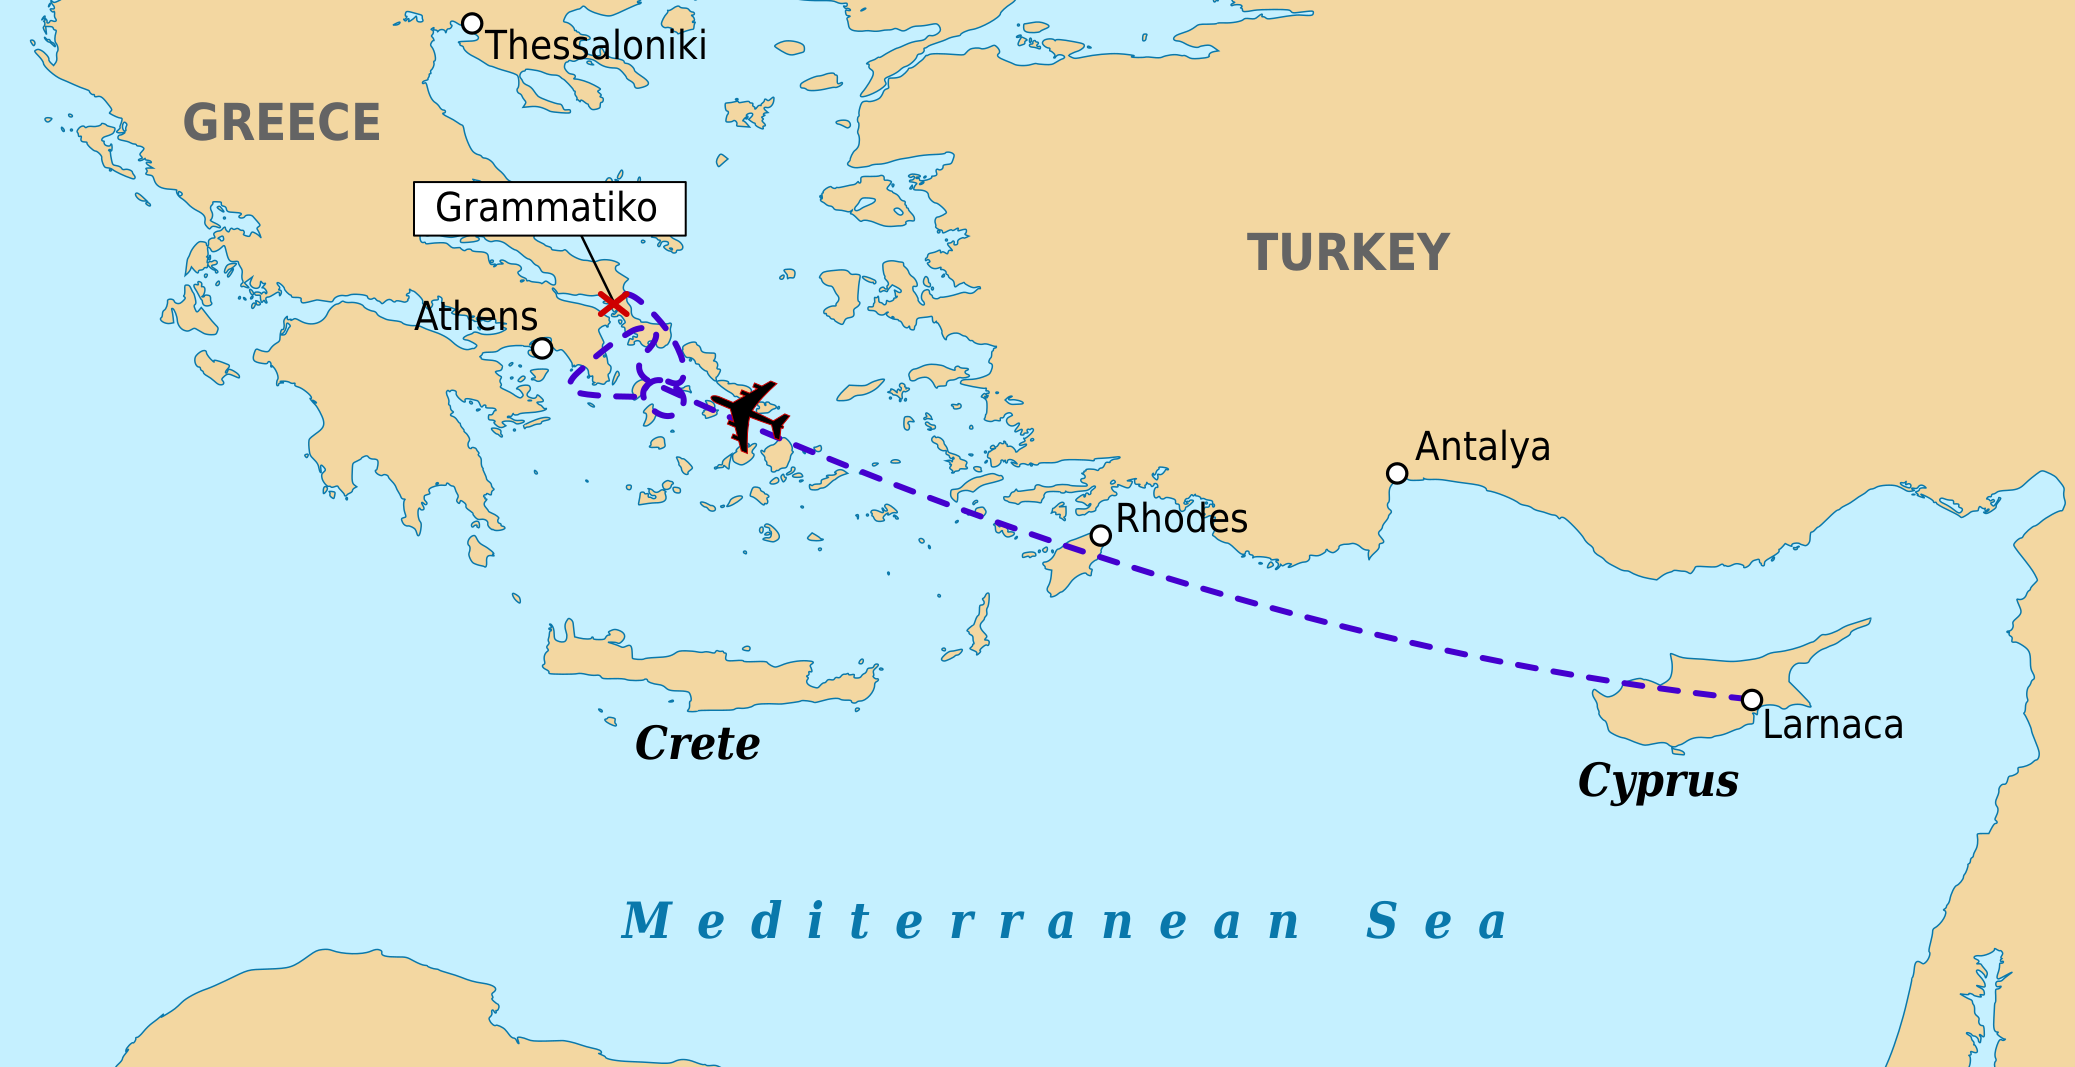 A map showing the flight path of Heliow Airways flight 522 which suffered an accident in 2005.